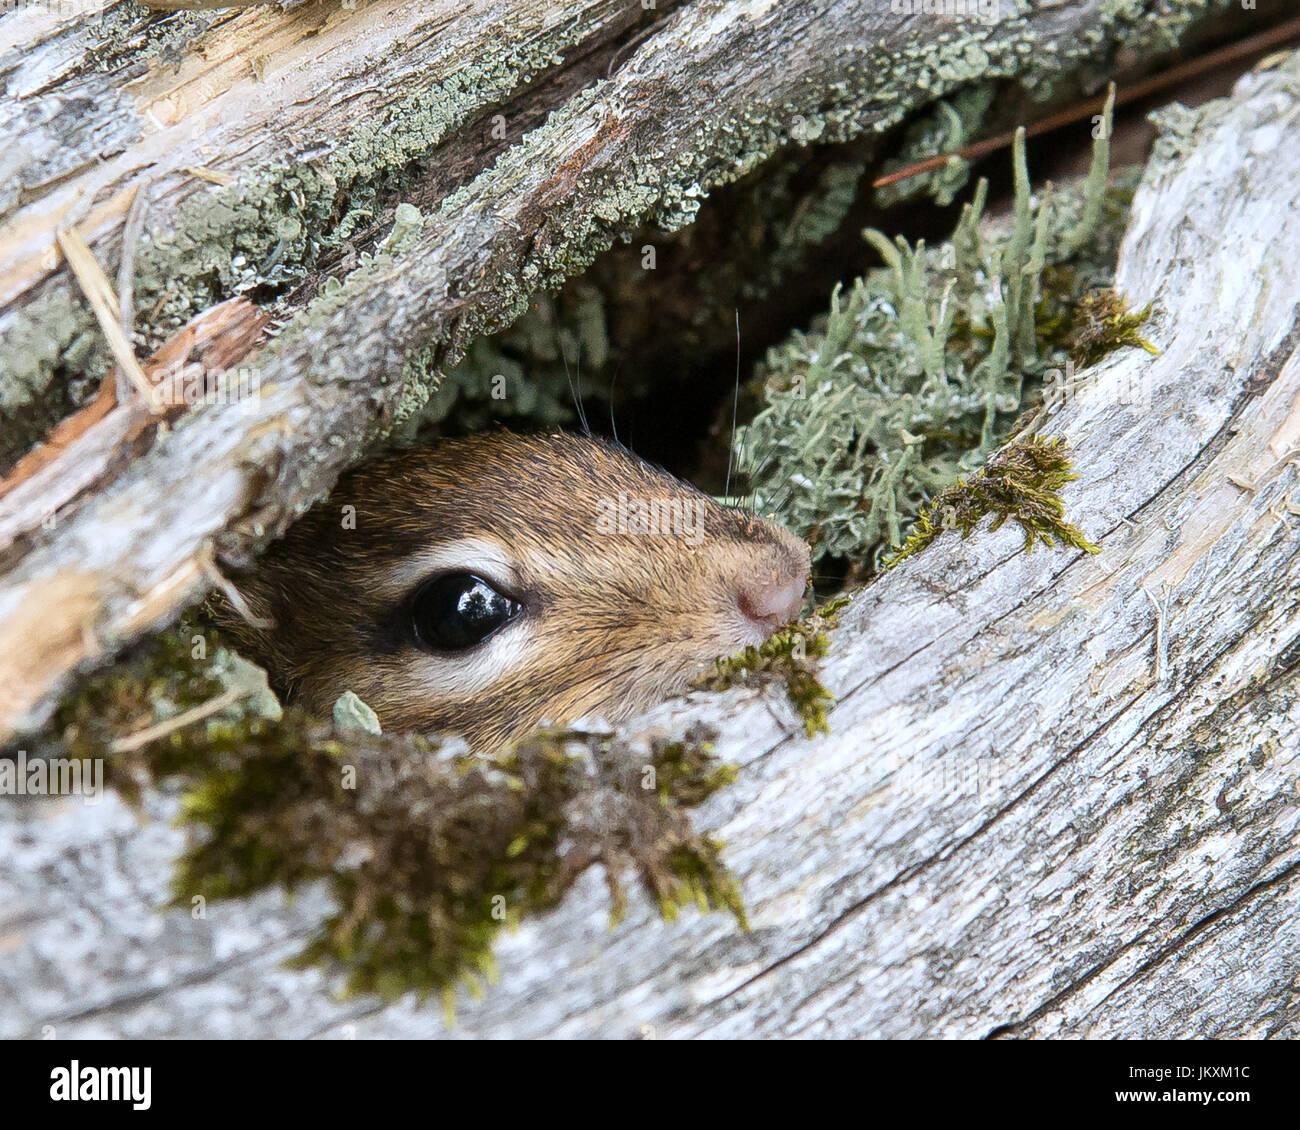 Chipmunk playing hide and seek Stock Photo